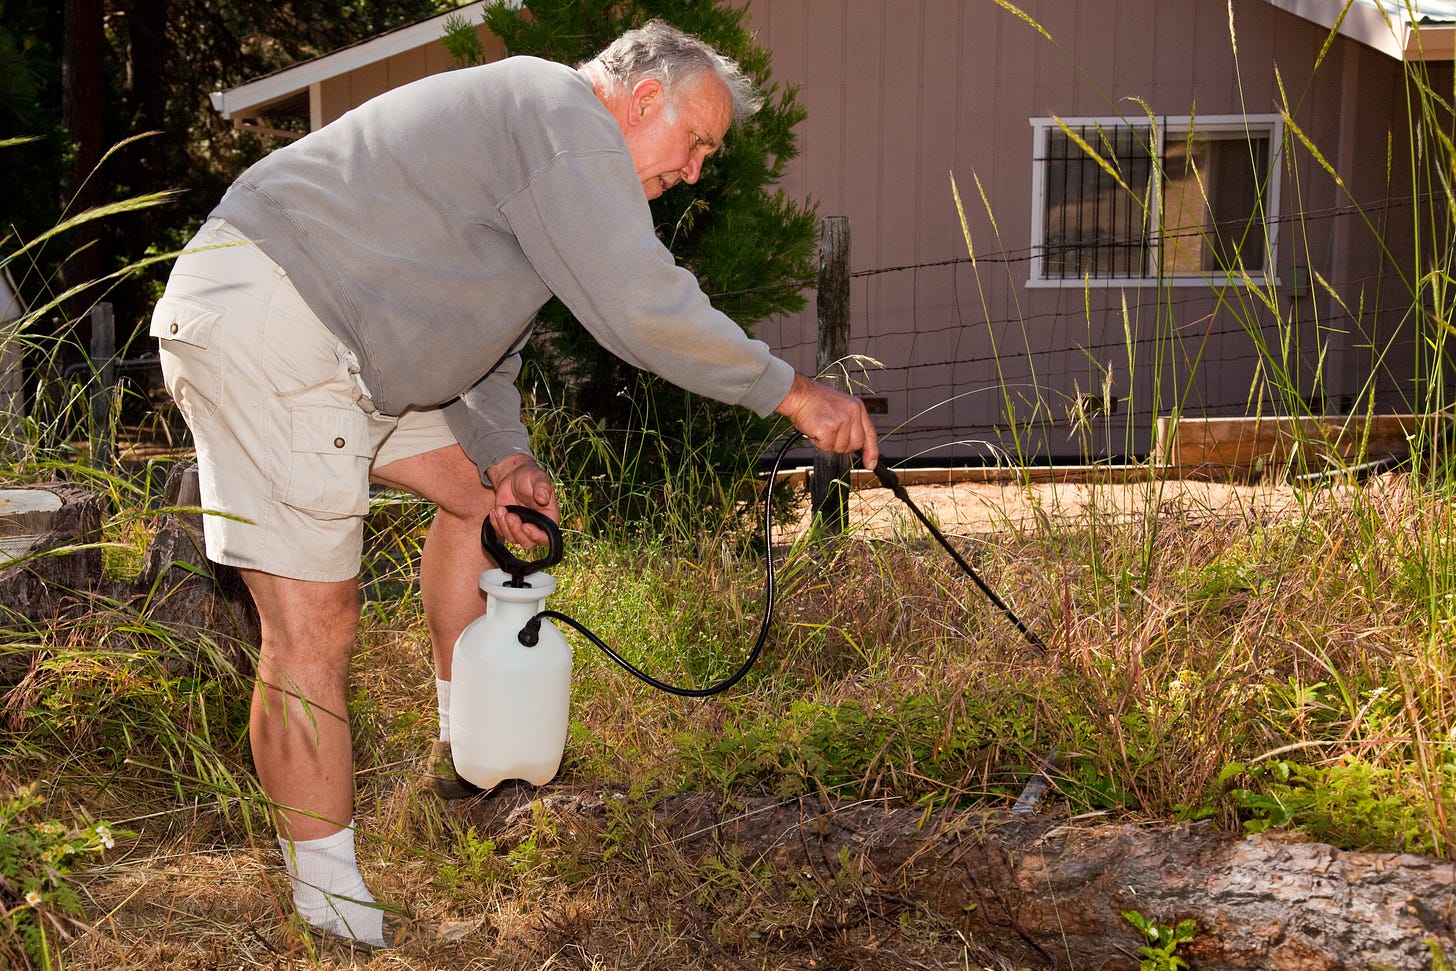 man in shorts with spray can, hose and sprayer applying liquid to weeds/plants